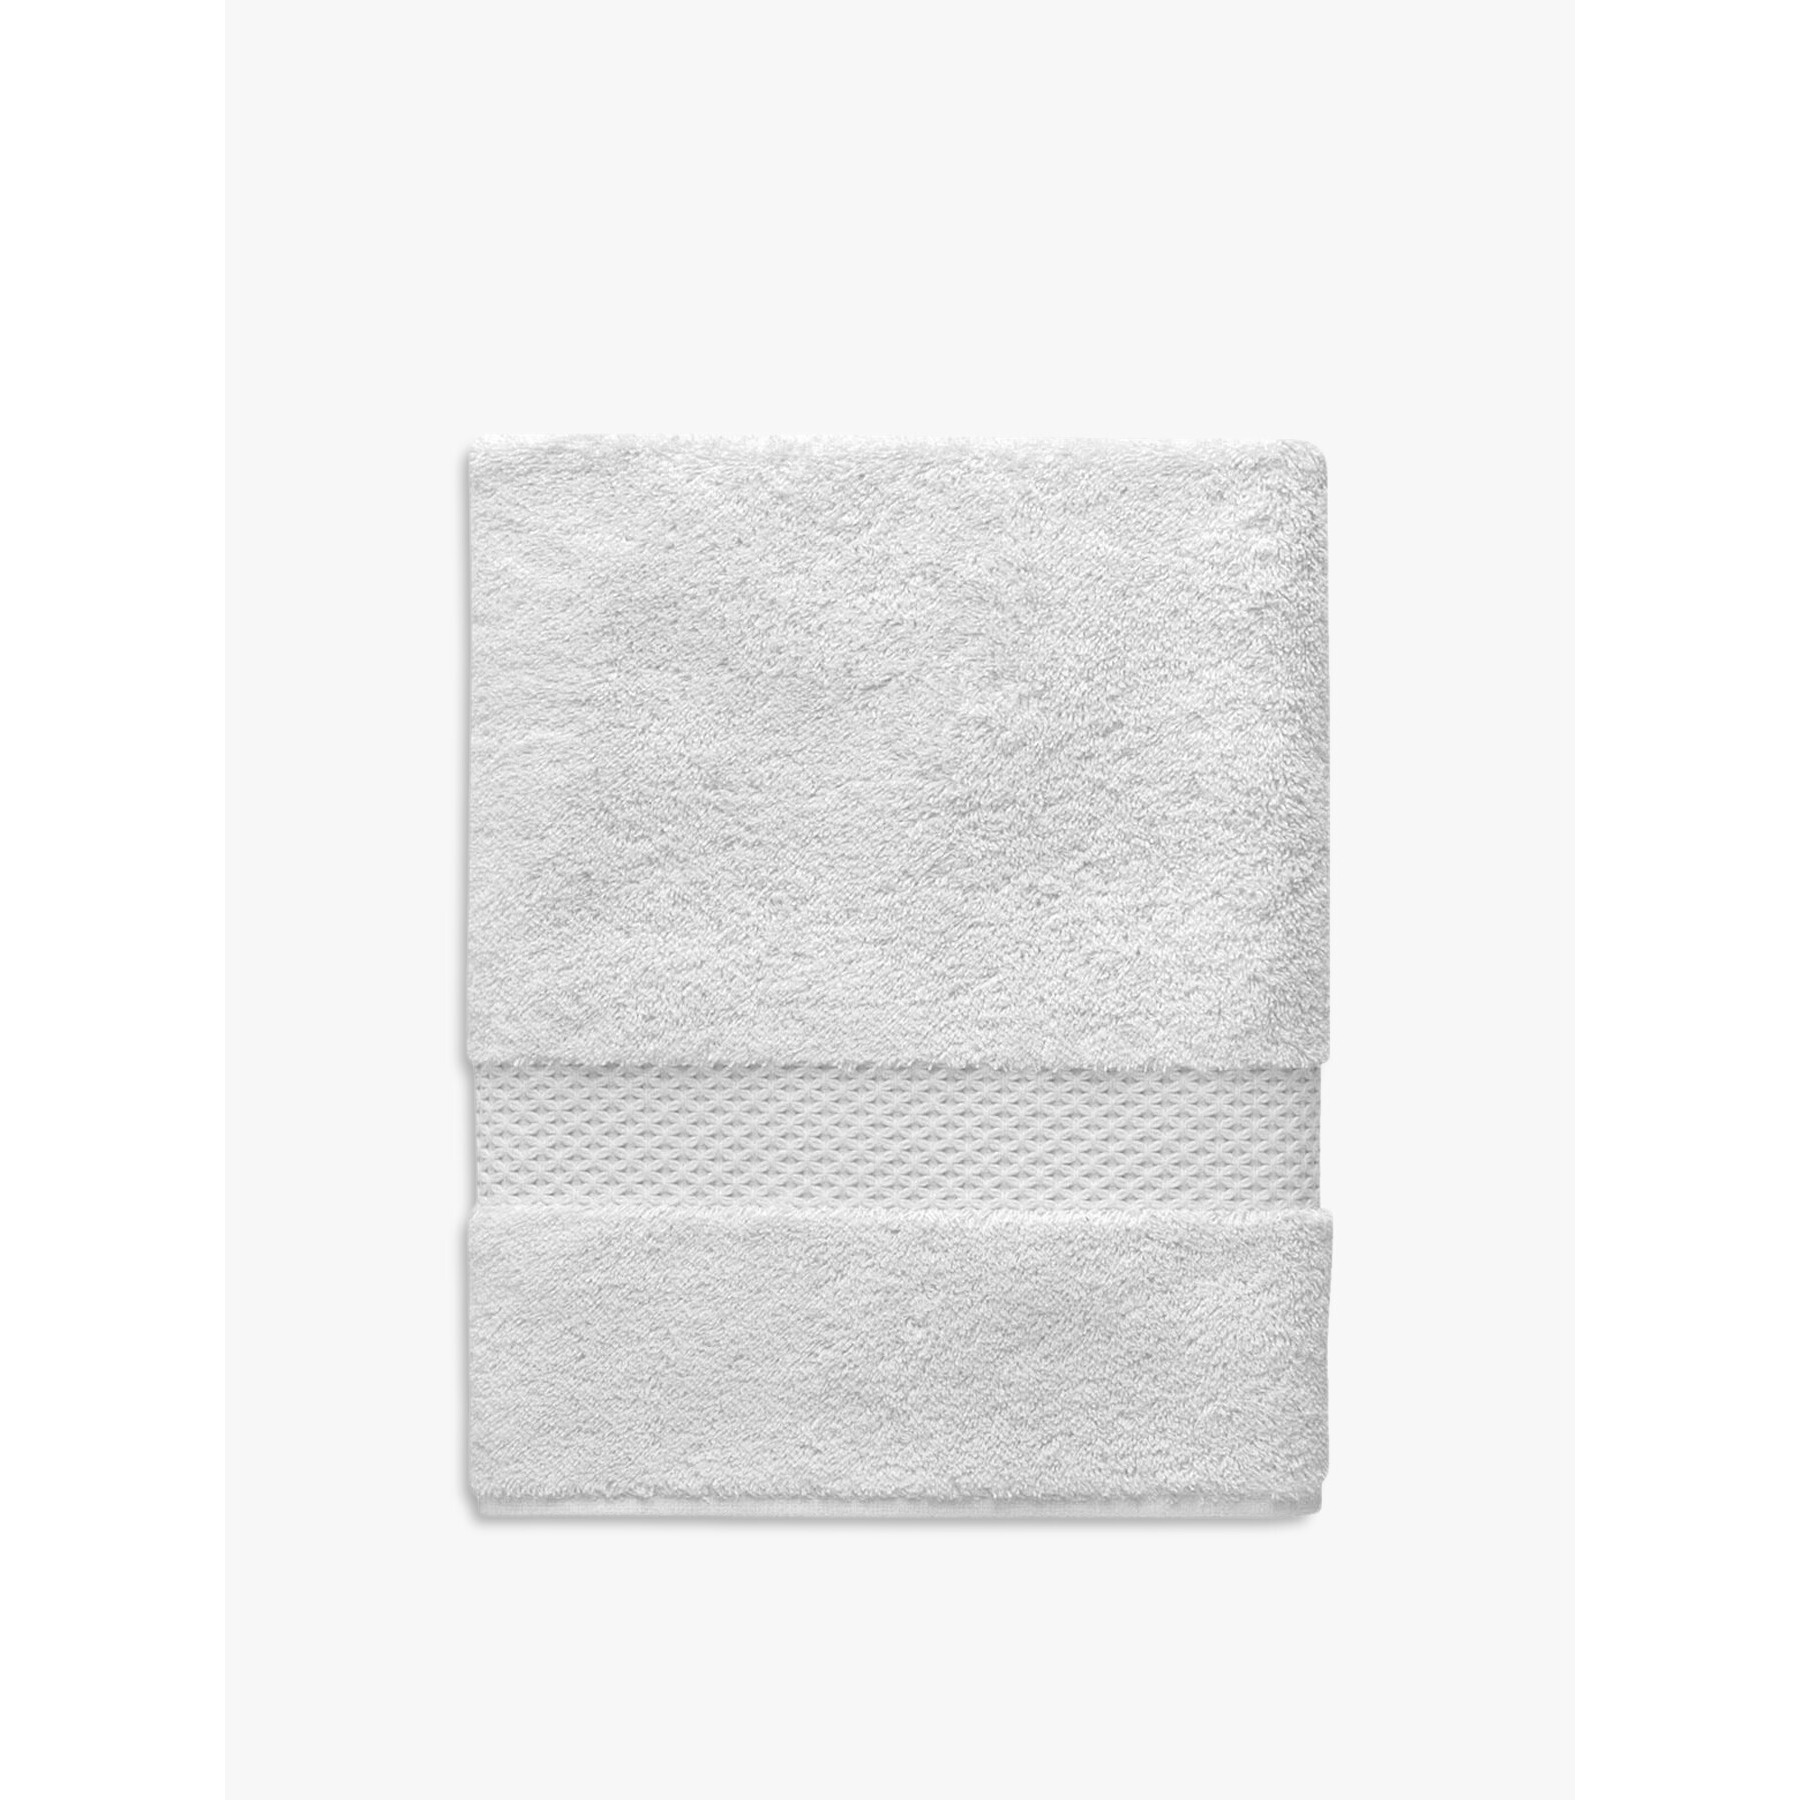 Yves Delorme Etoile Hand Towel Silver - image 1